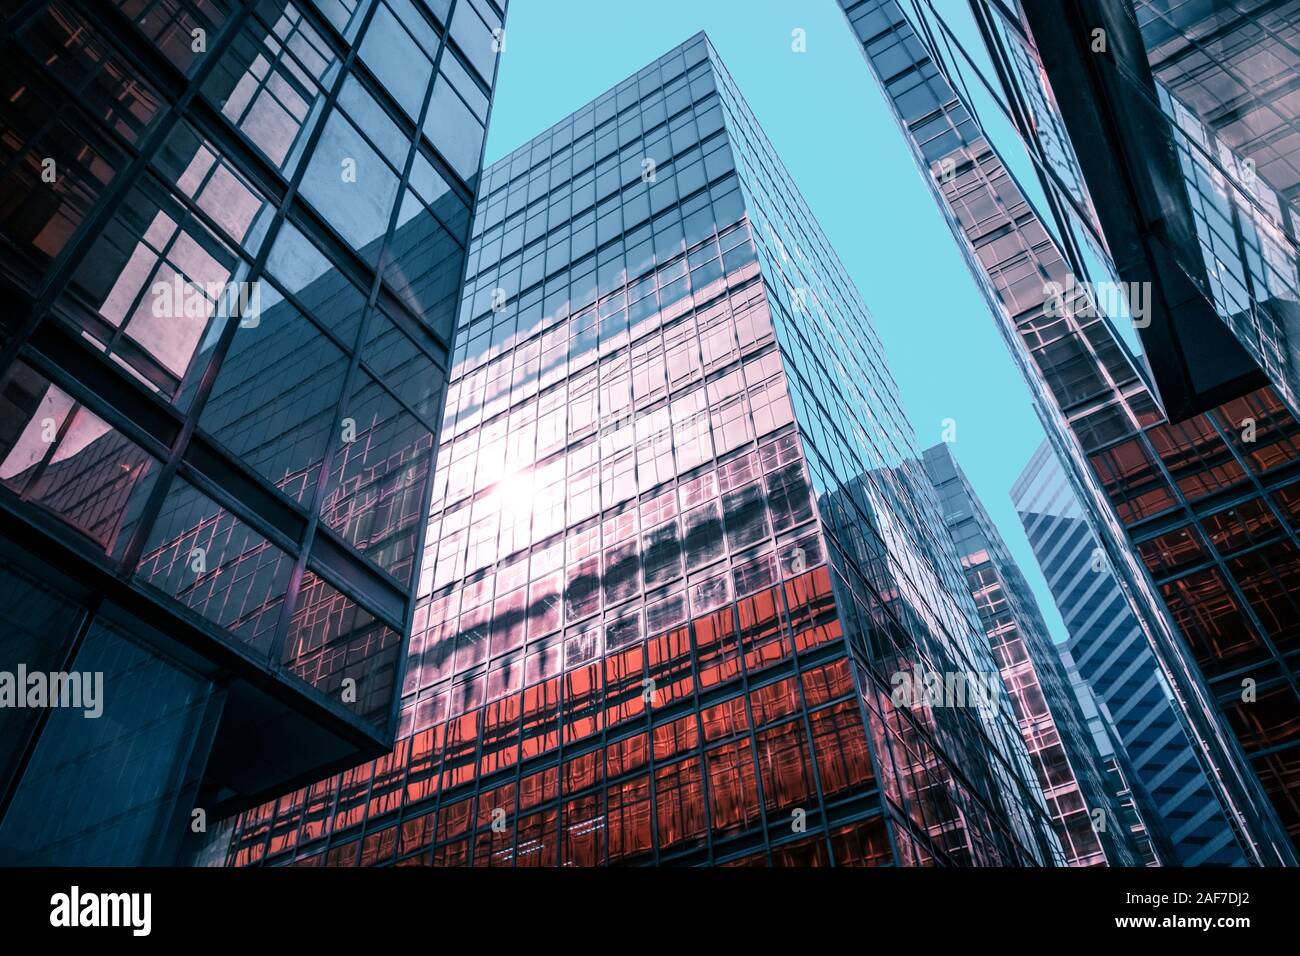 Modern office building facade - corporate business buildings Stock Photo